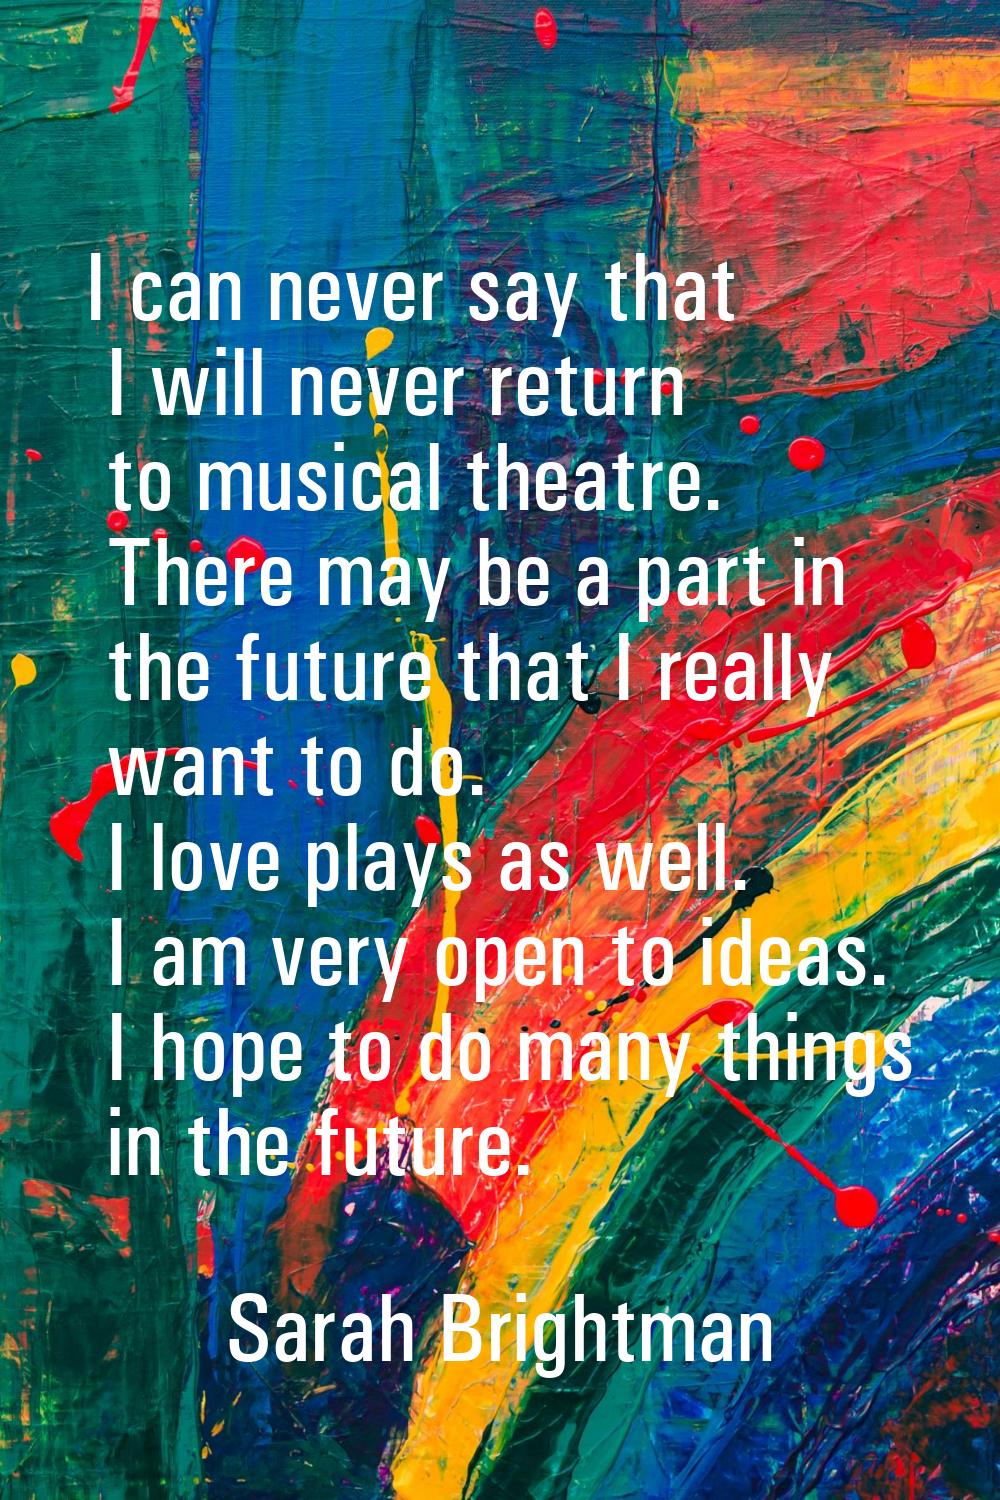 I can never say that I will never return to musical theatre. There may be a part in the future that